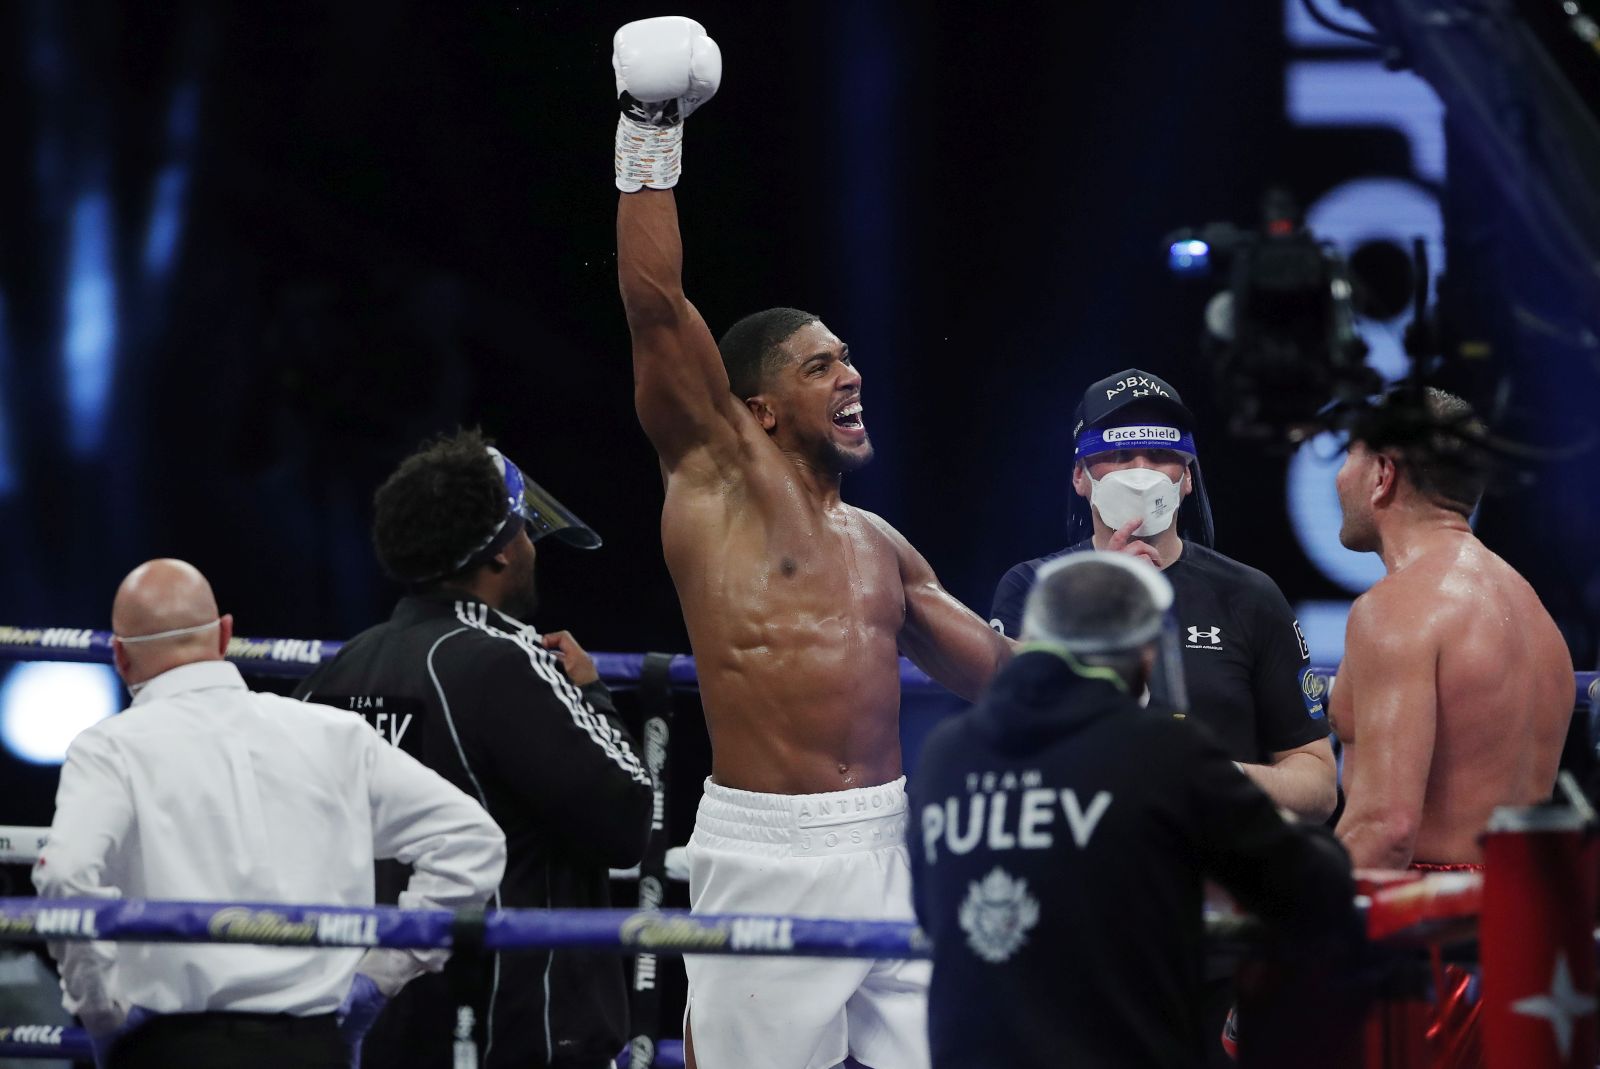 epa08880756 Defending WBA (Super), IBF, WBO, and IBO world champion Anthony Joshua of Britain (L) reacts after beating Kubrat Pulev of Bulgaria by TKO in the ninth round during their heavyweight world title bout at the SSE Arena in London, Britain, 12 December 2020.  EPA/Andrew Couldridge / POOL